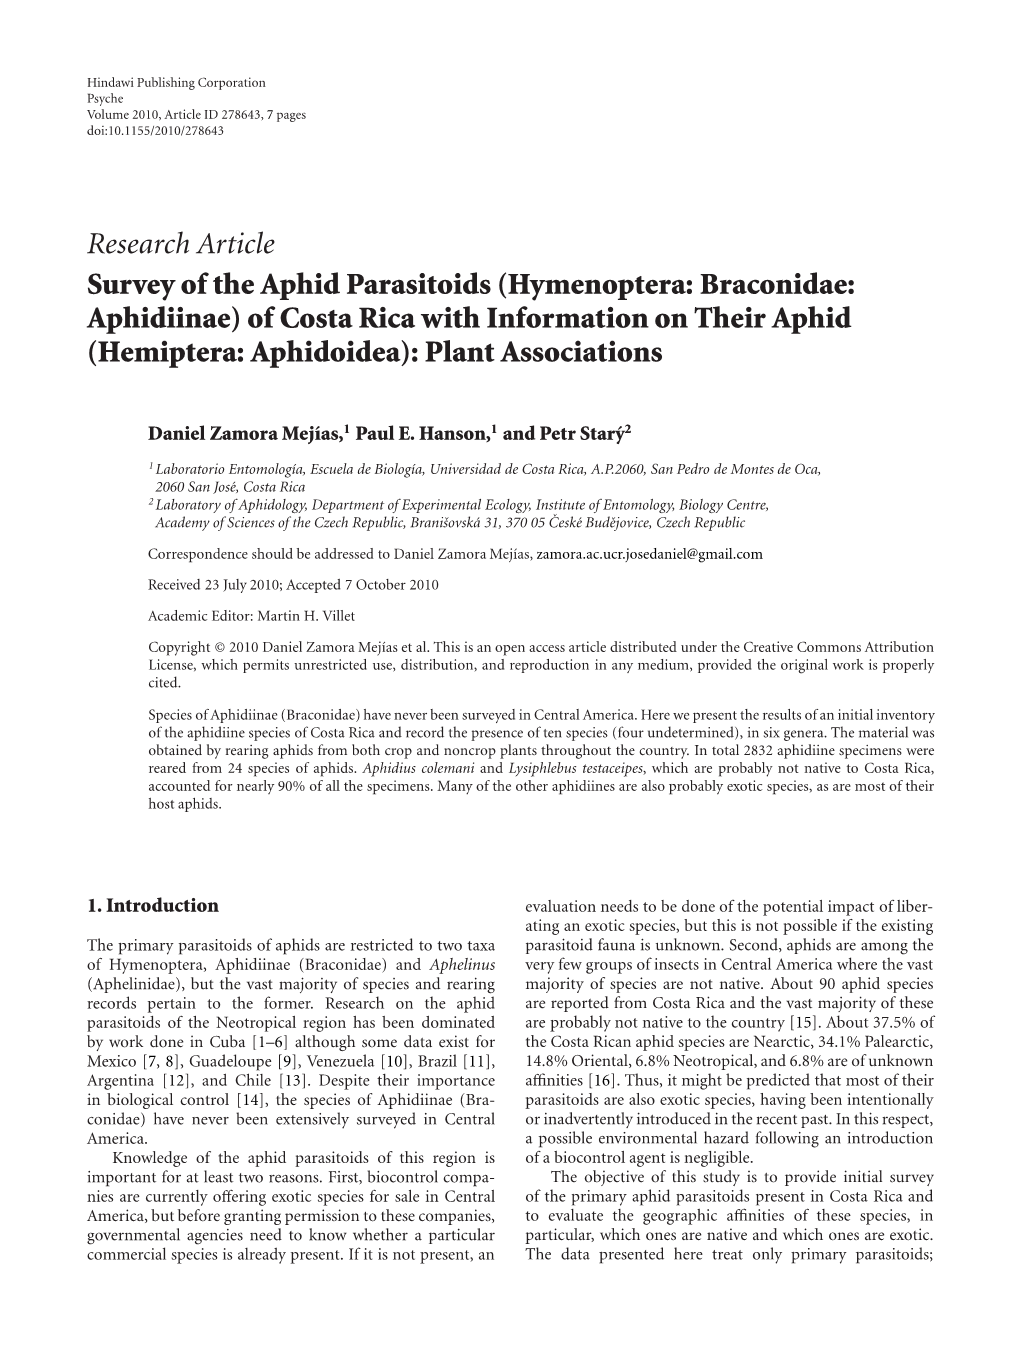 Survey of the Aphid Parasitoids (Hymenoptera: Braconidae: Aphidiinae) of Costa Rica with Information on Their Aphid (Hemiptera: Aphidoidea): Plant Associations